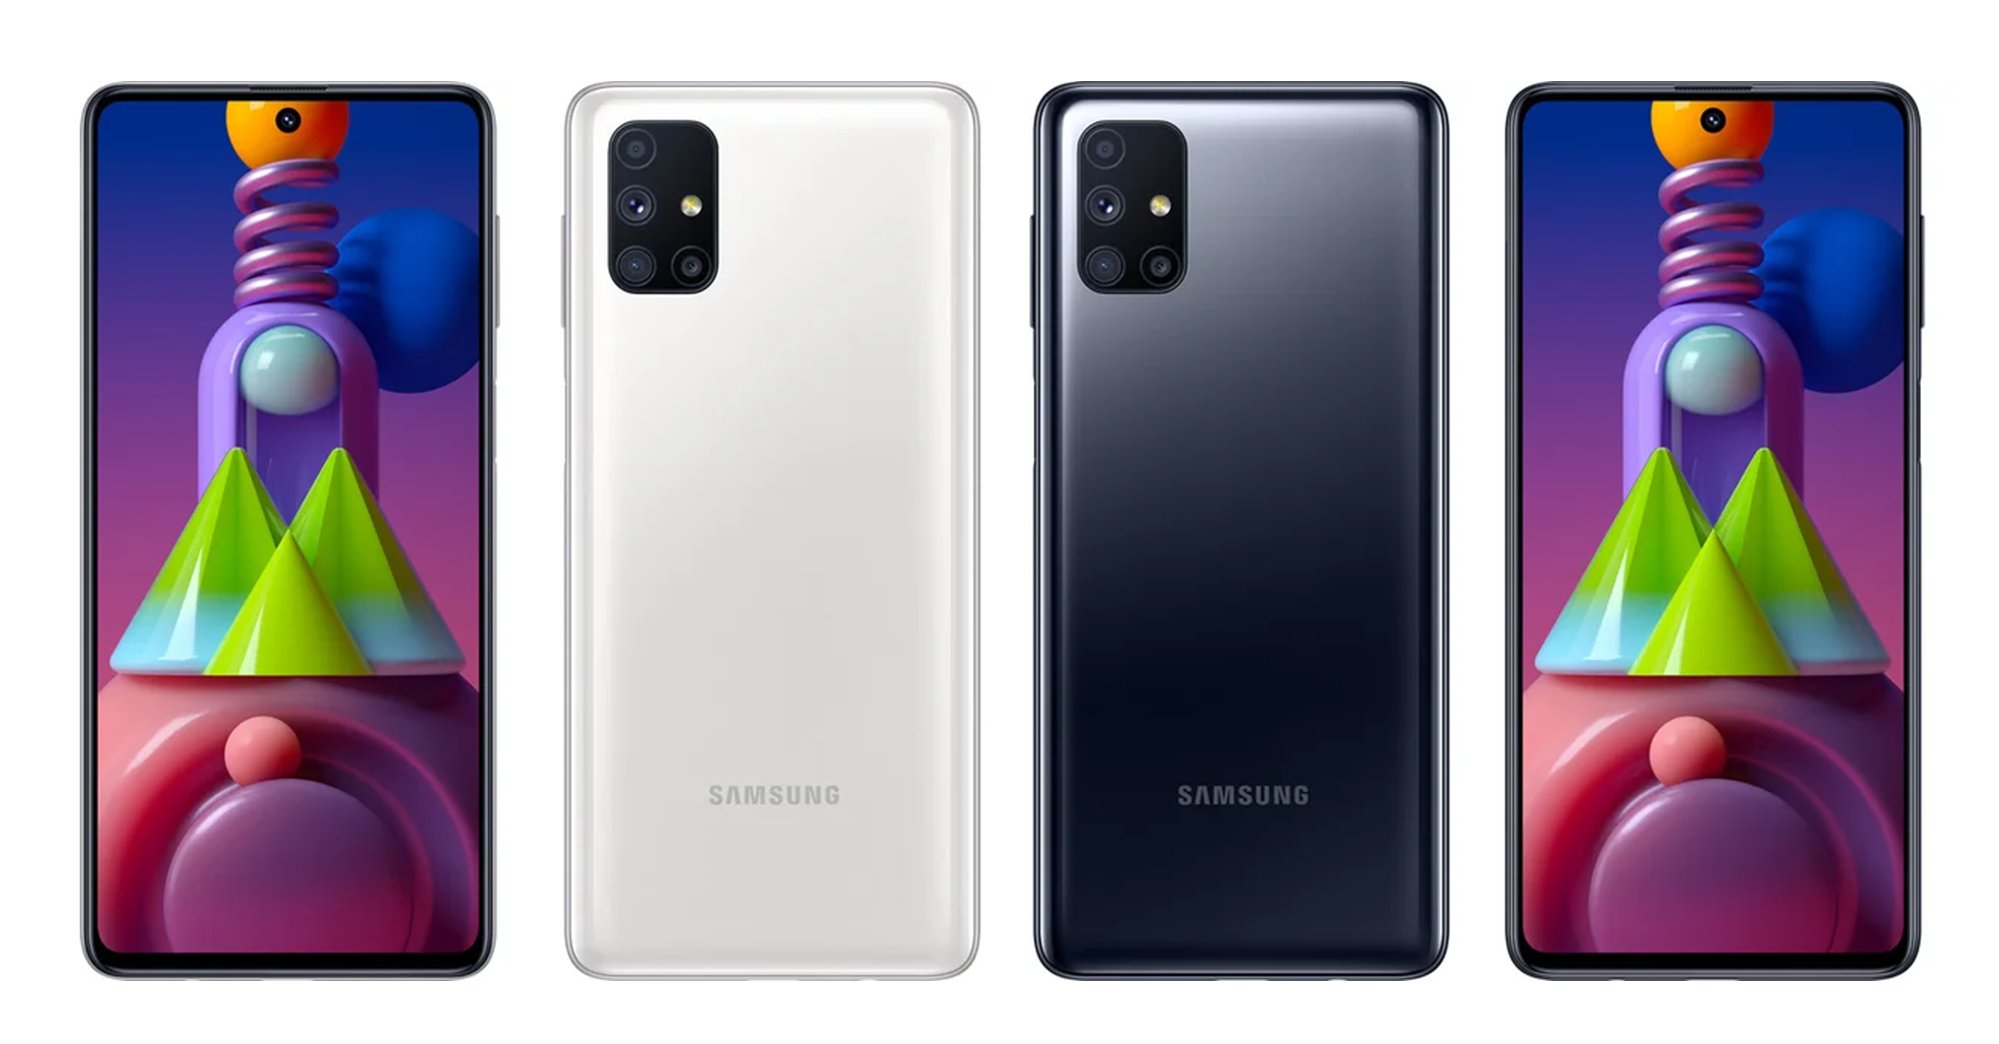 Samsung launches its most powerful M Series smartphone in India